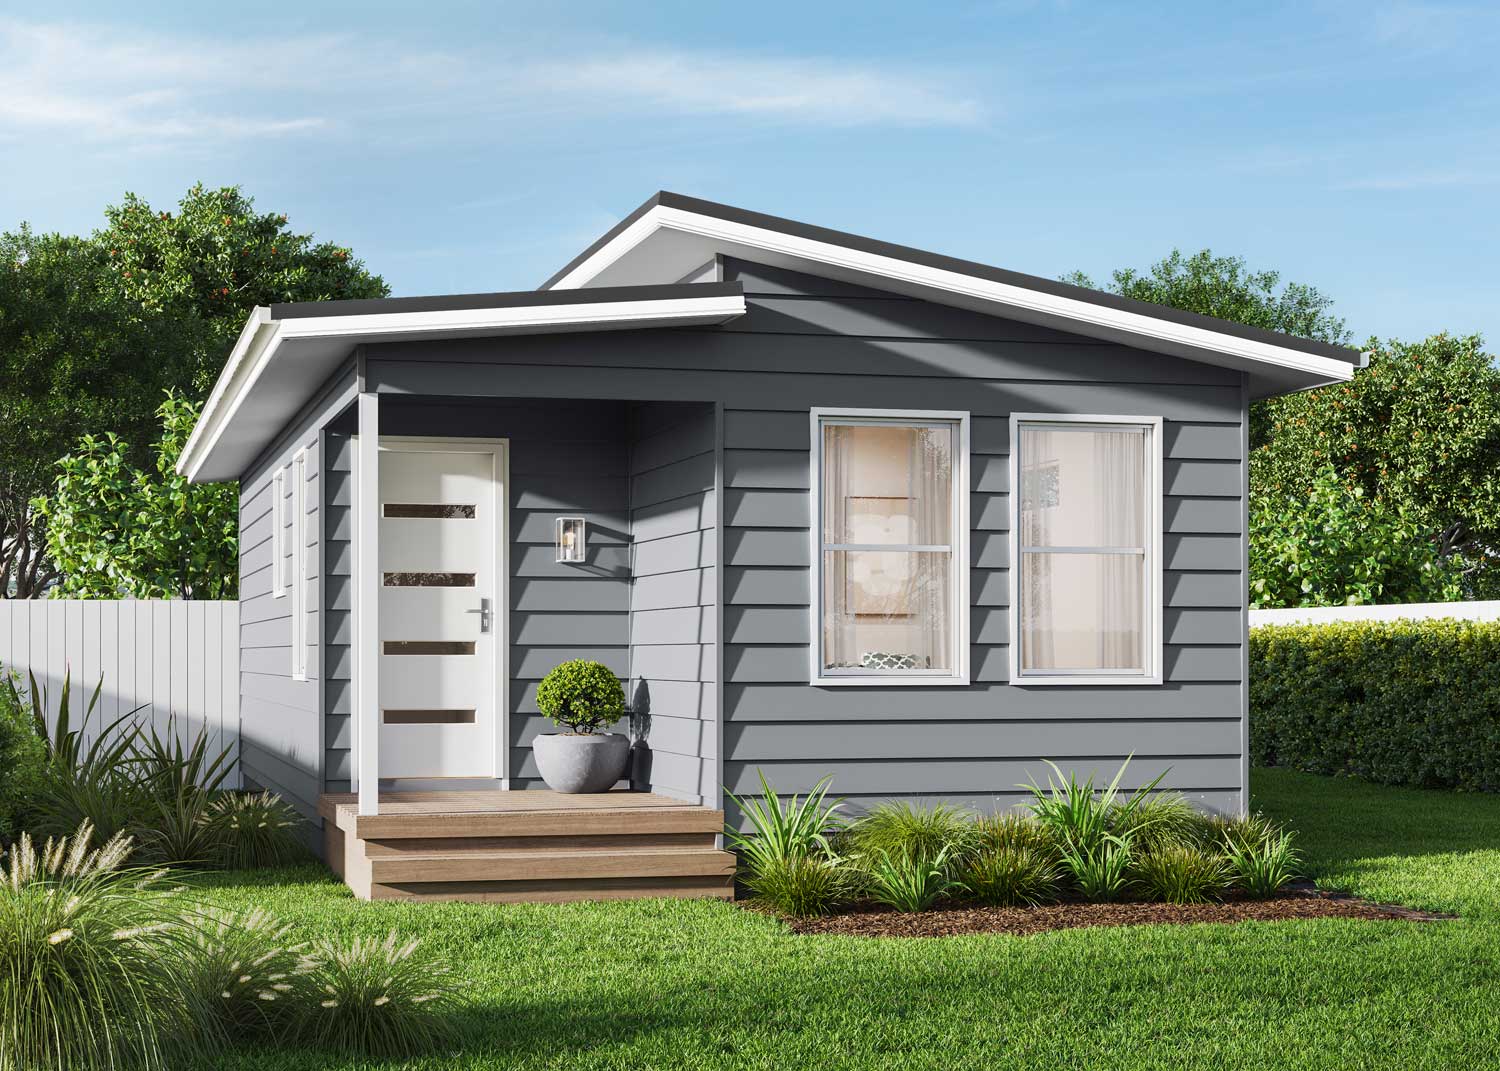 Modern Granny Flats: The Solution for Your Family's Needs?